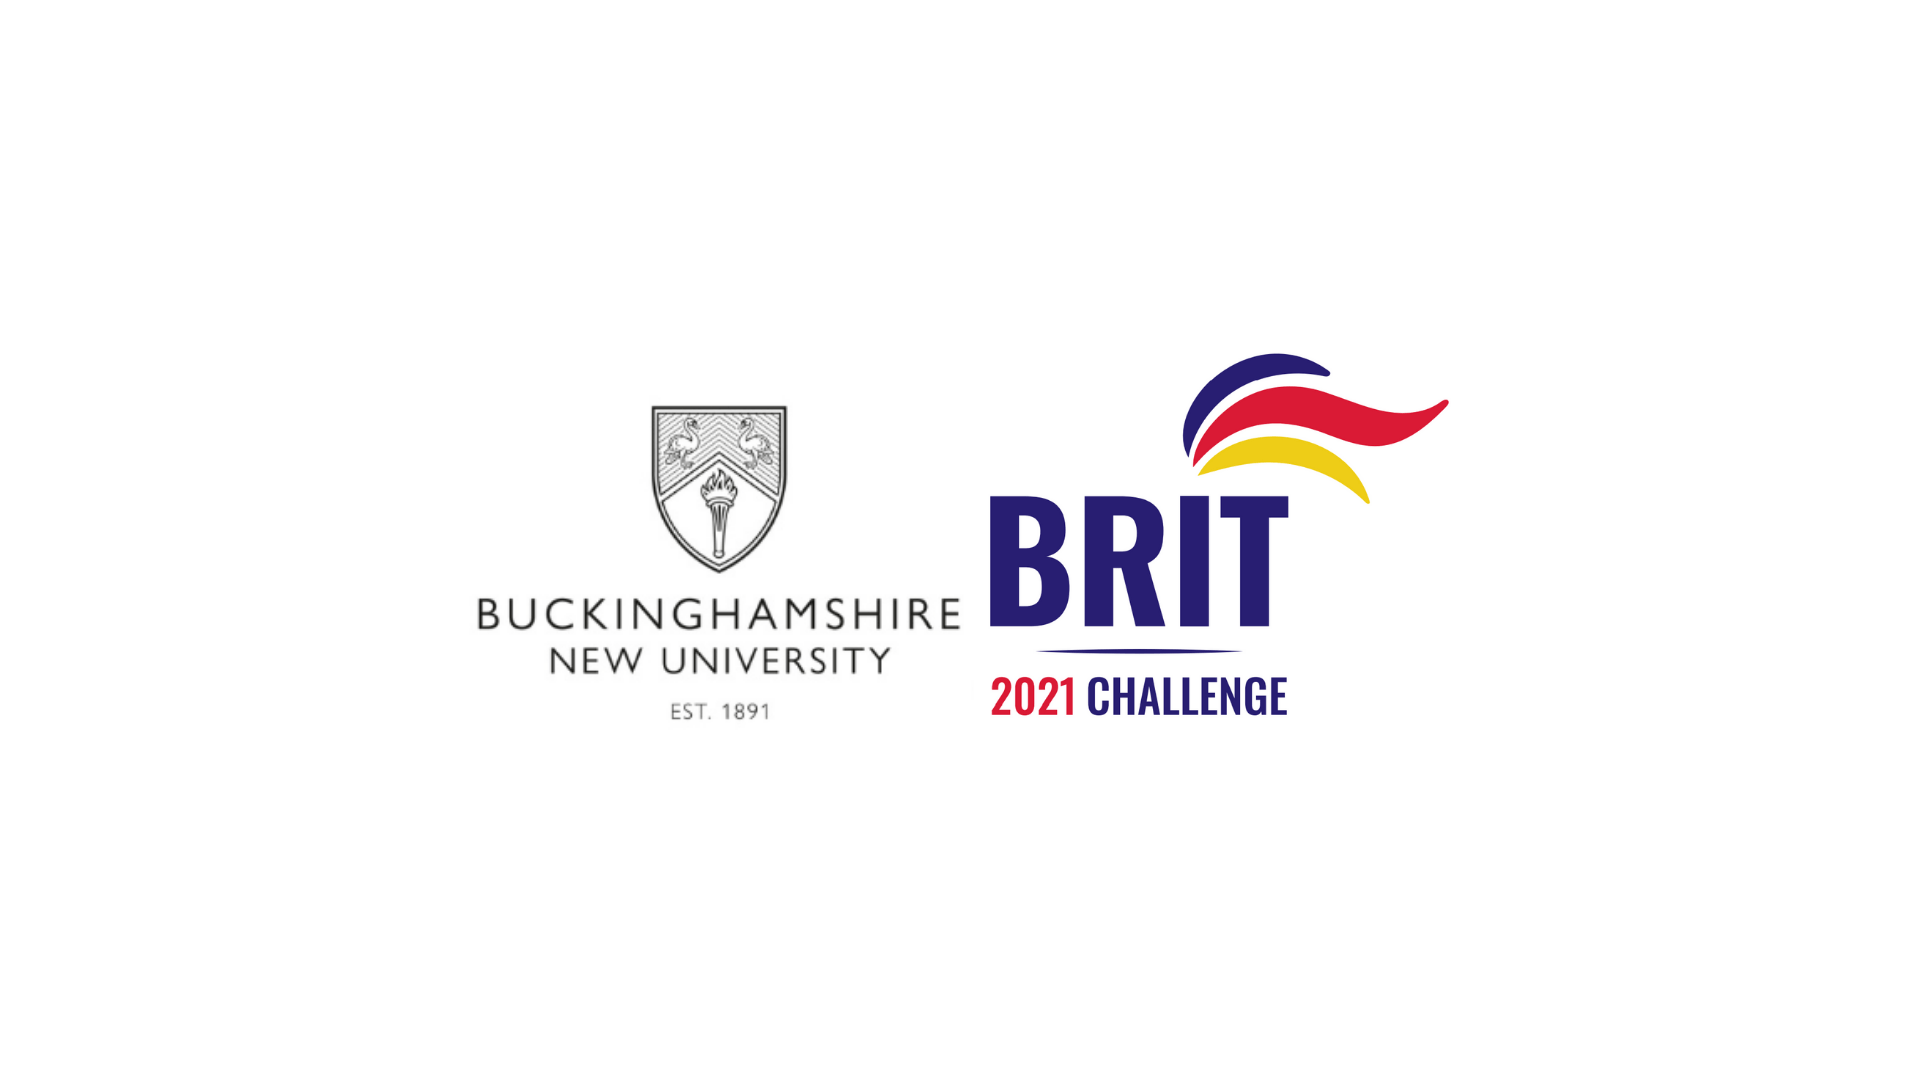 An image of the BNU and BRIT logos